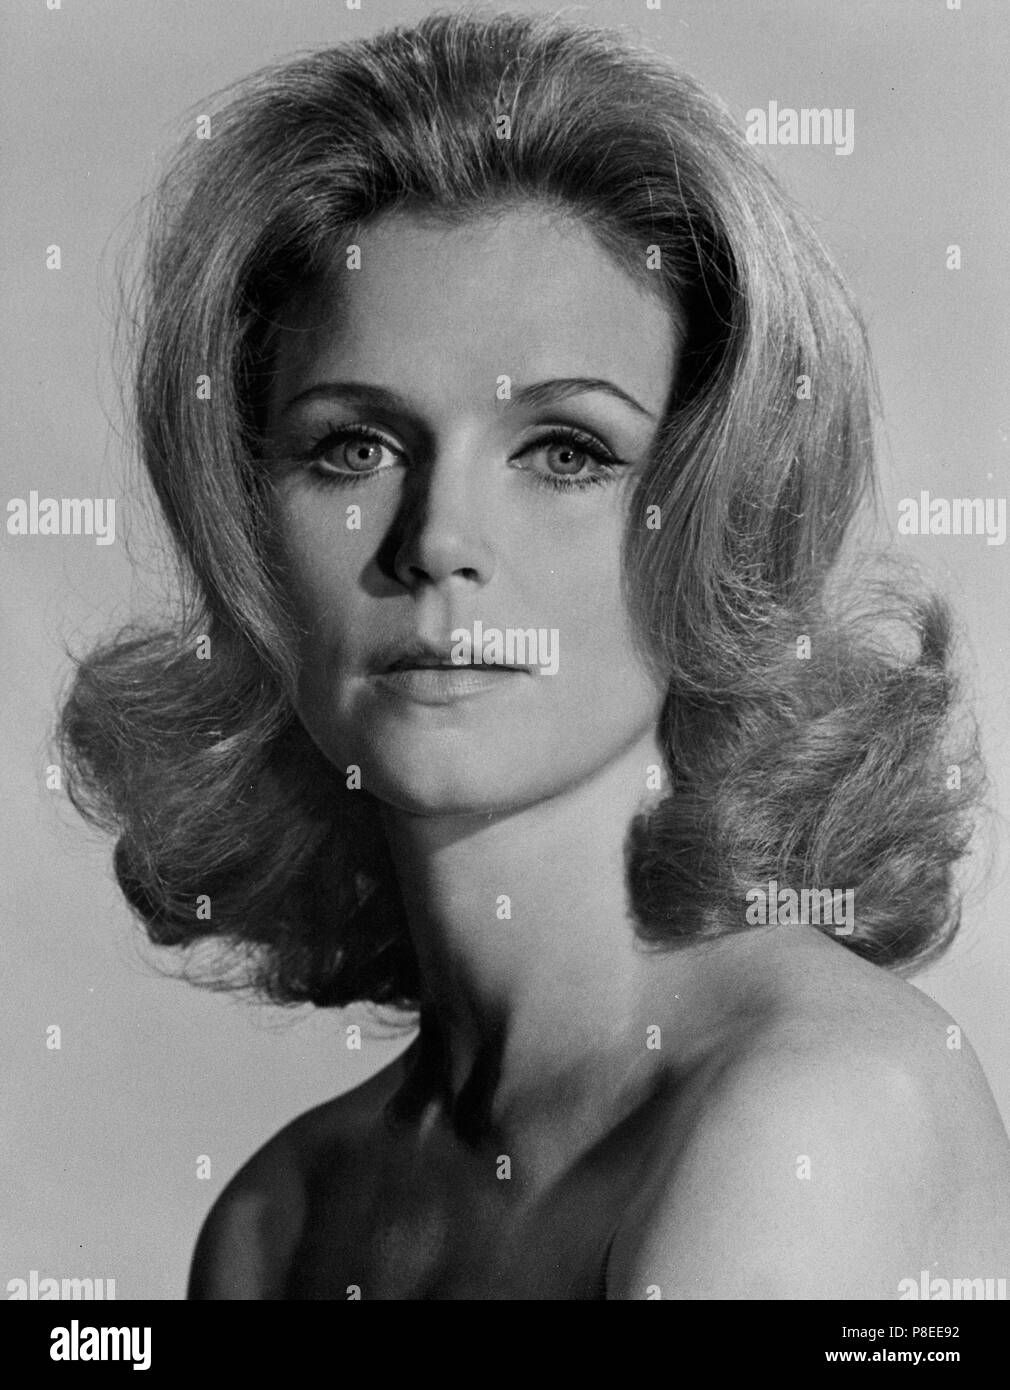 Lee remick of pictures Lee Remick